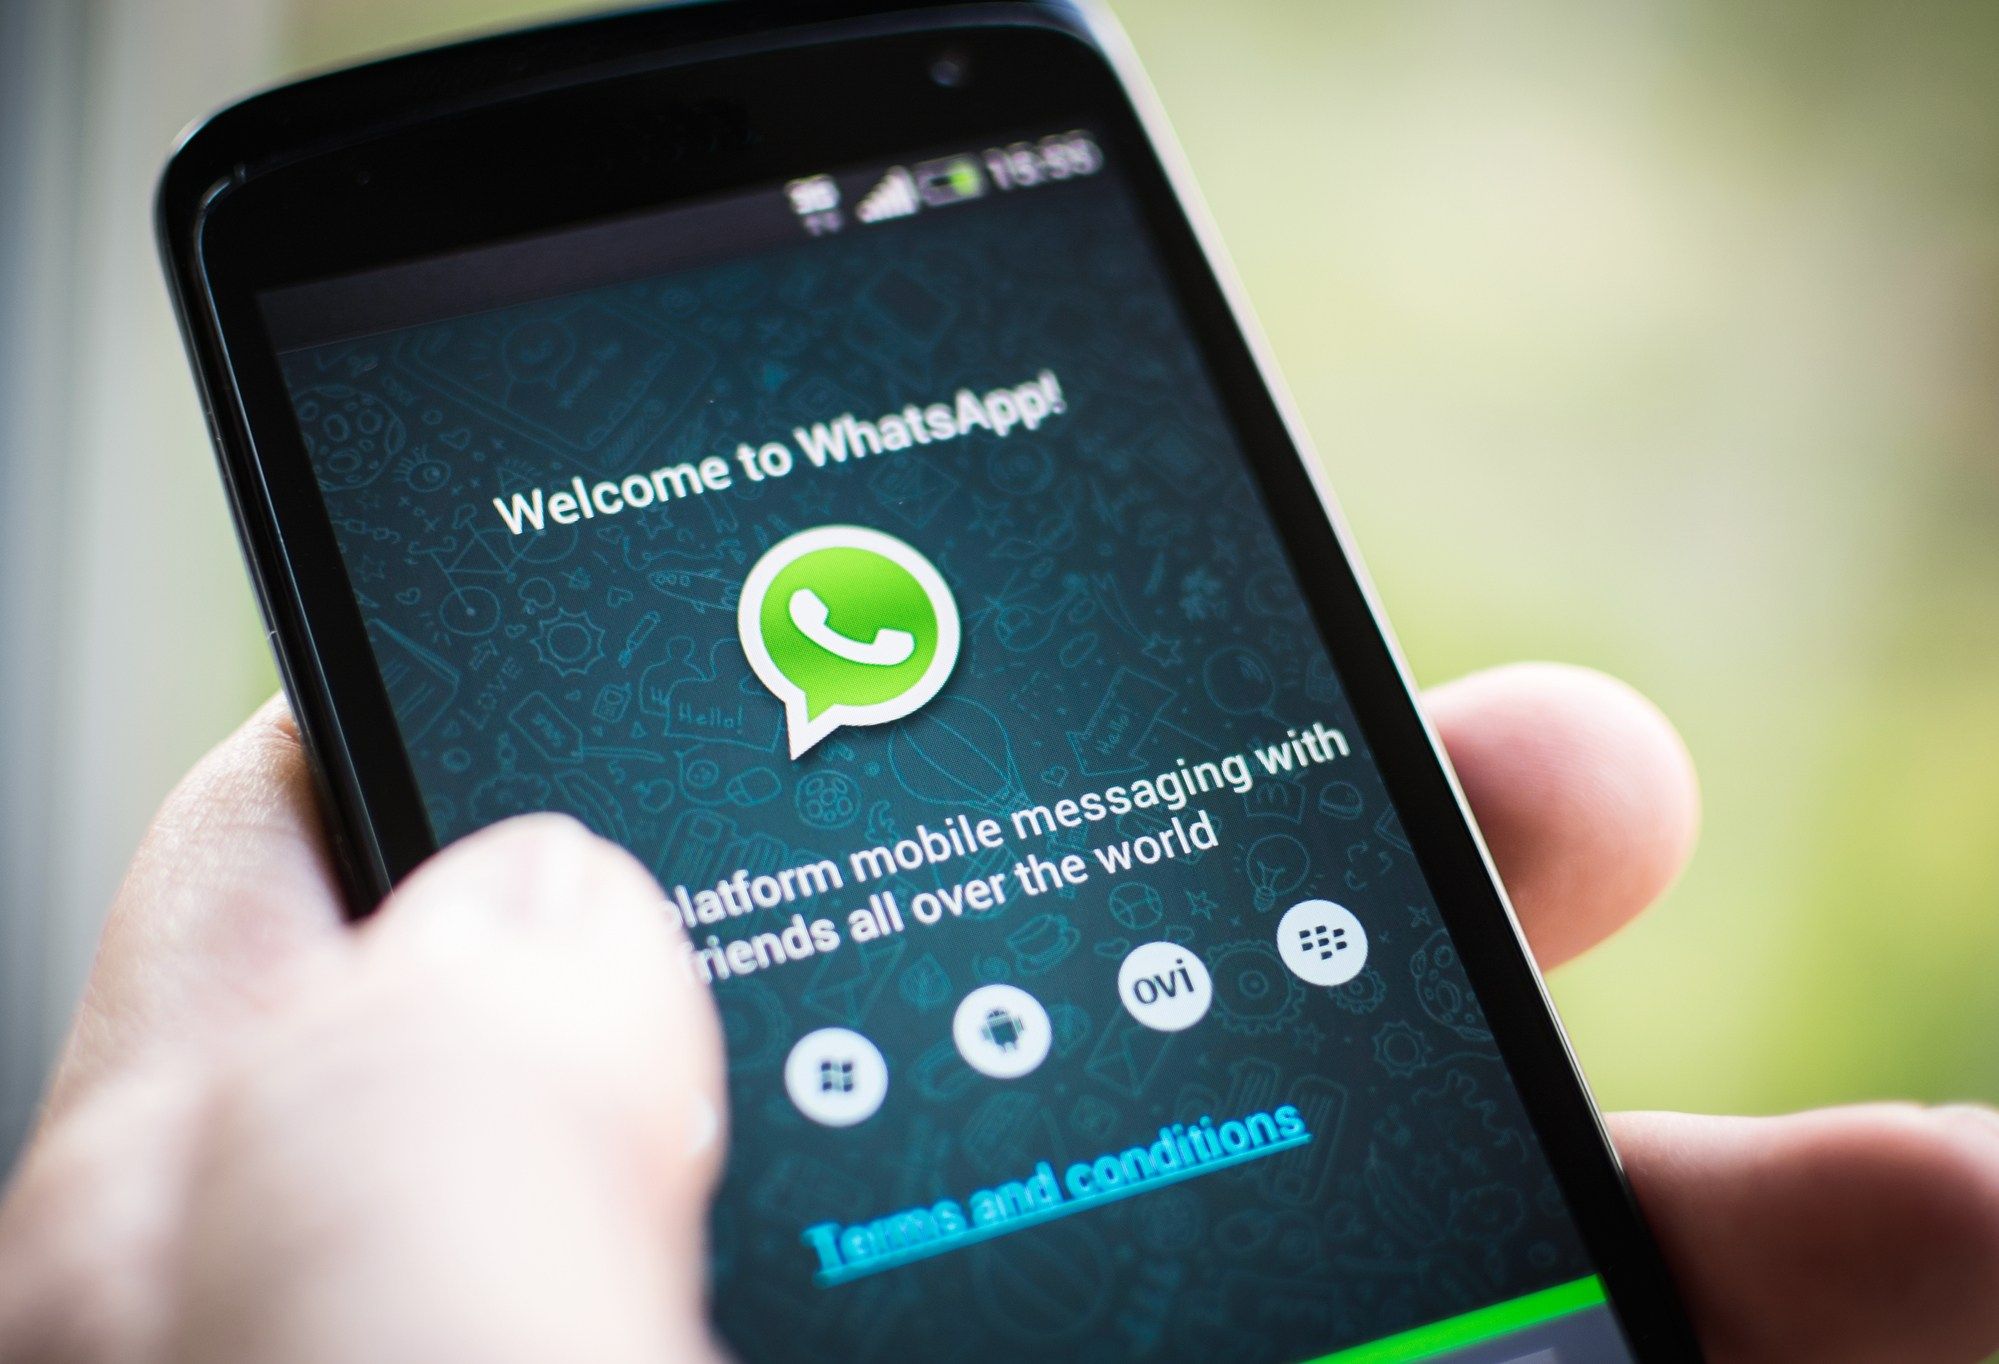 WhatsApp Moving On With Privacy Changes Despite Pushback